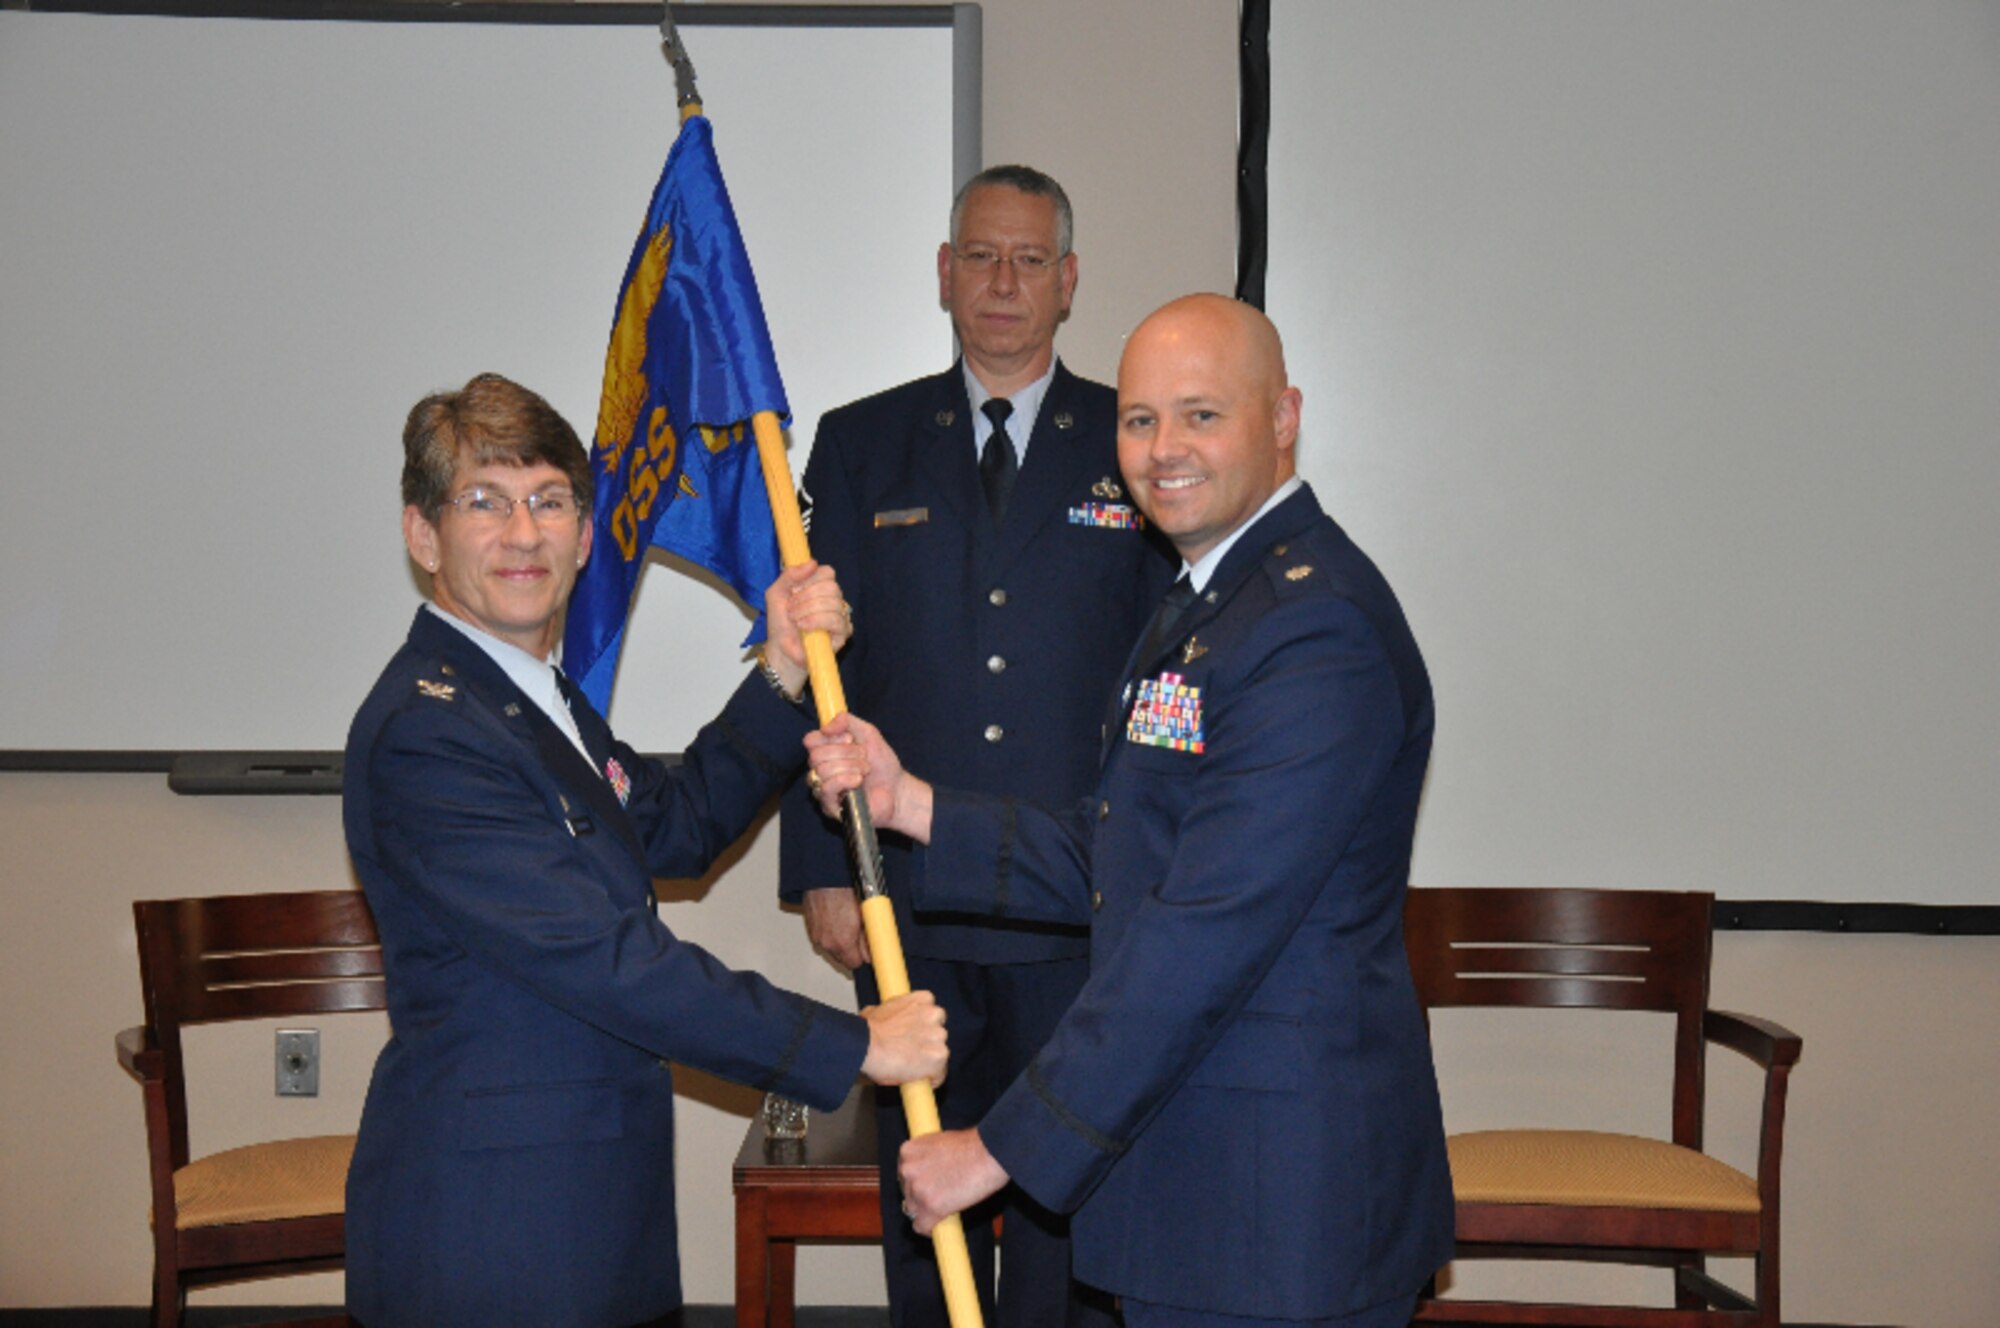 Members of the 315th Operations Support Squadron welcomed a new commander during a change of command ceremony May 15, 2016 at Joint Base Charleston.  Lt. Col. Ronald Schier assumed command from Lt. Col. Lara Morrison at the ceremony. (U.S. Air Force photo by Maj. Wayne Capps)